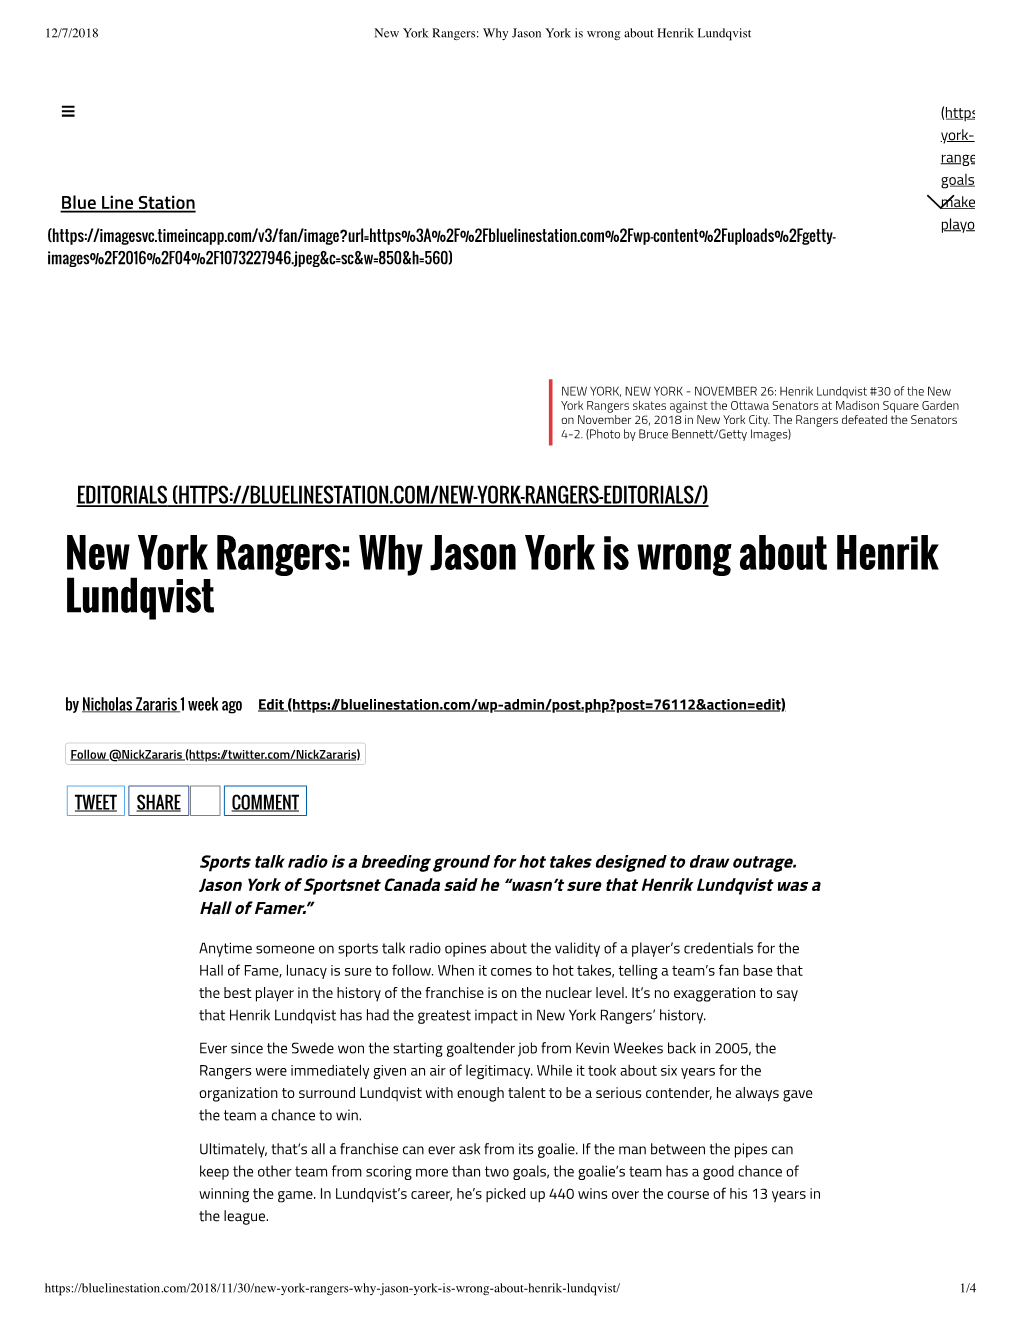 New York Rangers: Why Jason York Is Wrong About Henrik Lundqvist